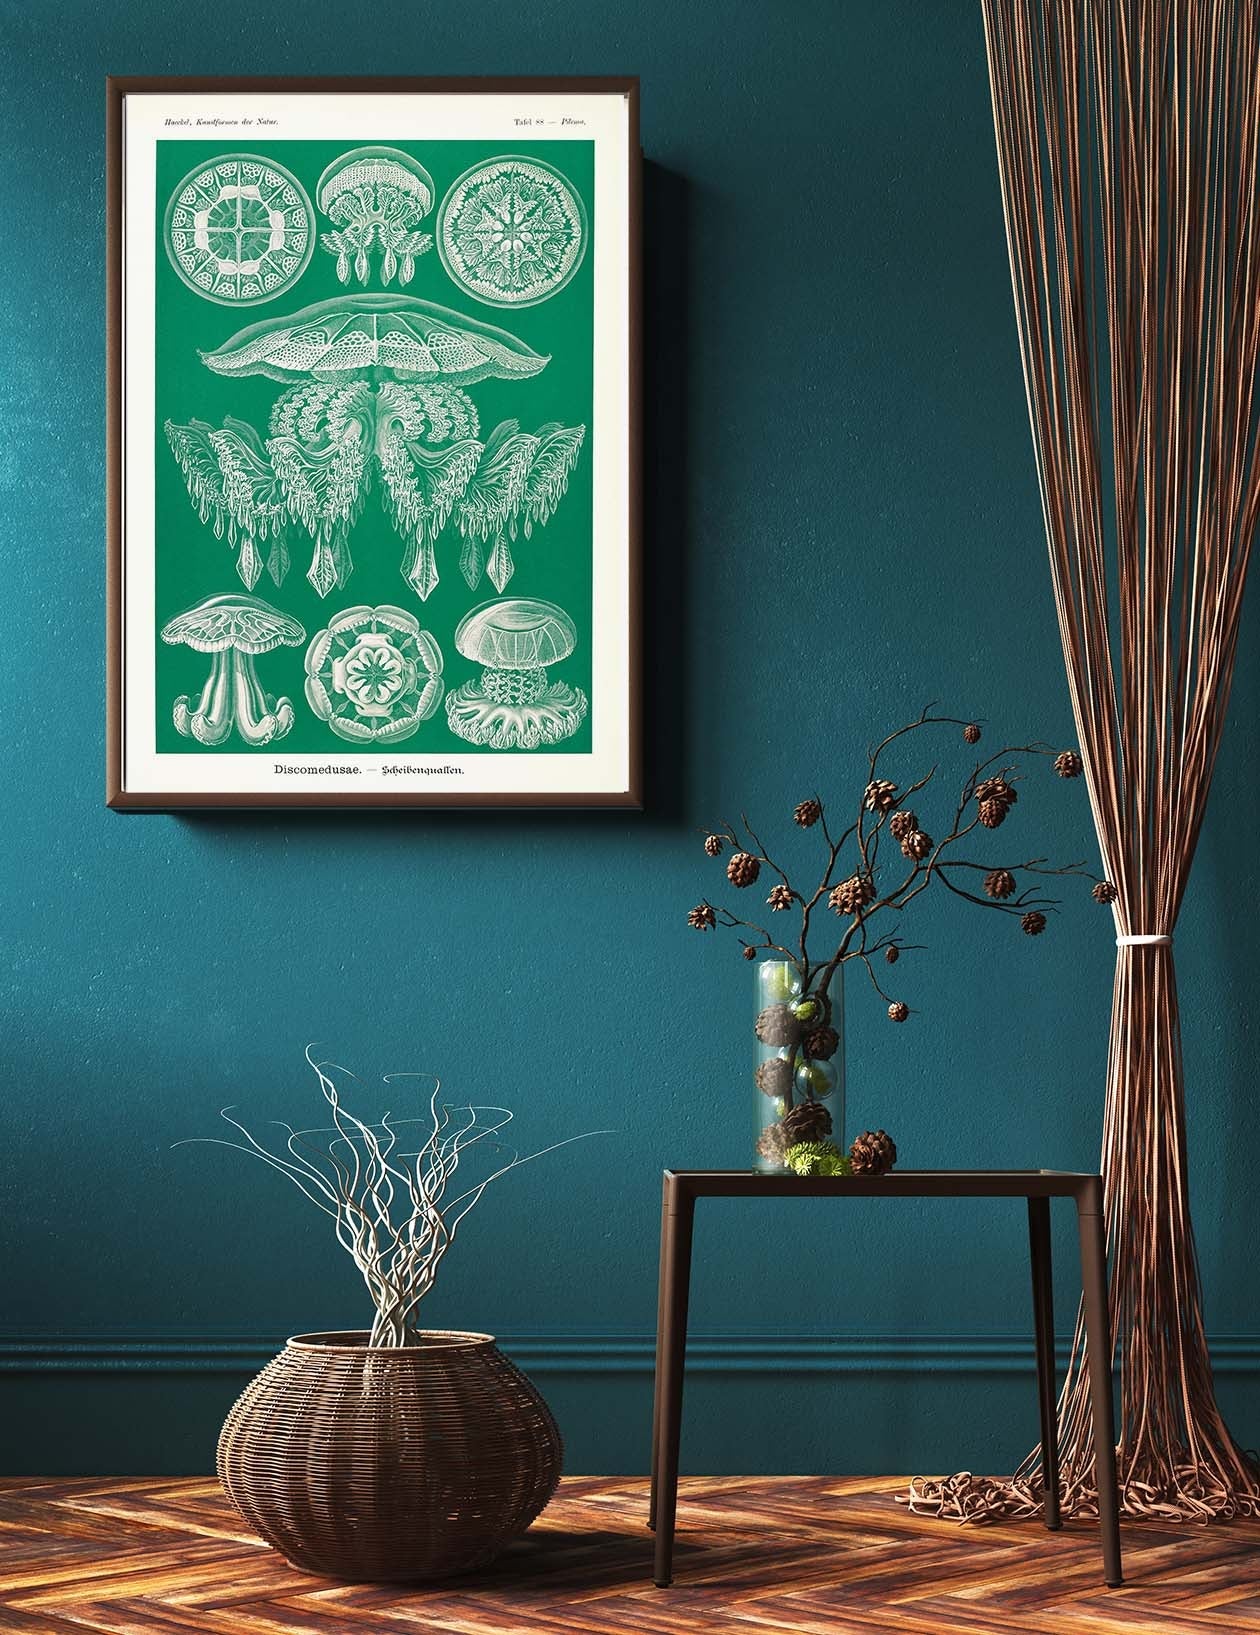 Ernst Haeckel Wall Art - Discomedusae Green Jellyfish by Ernst Haeckel Poster with borders